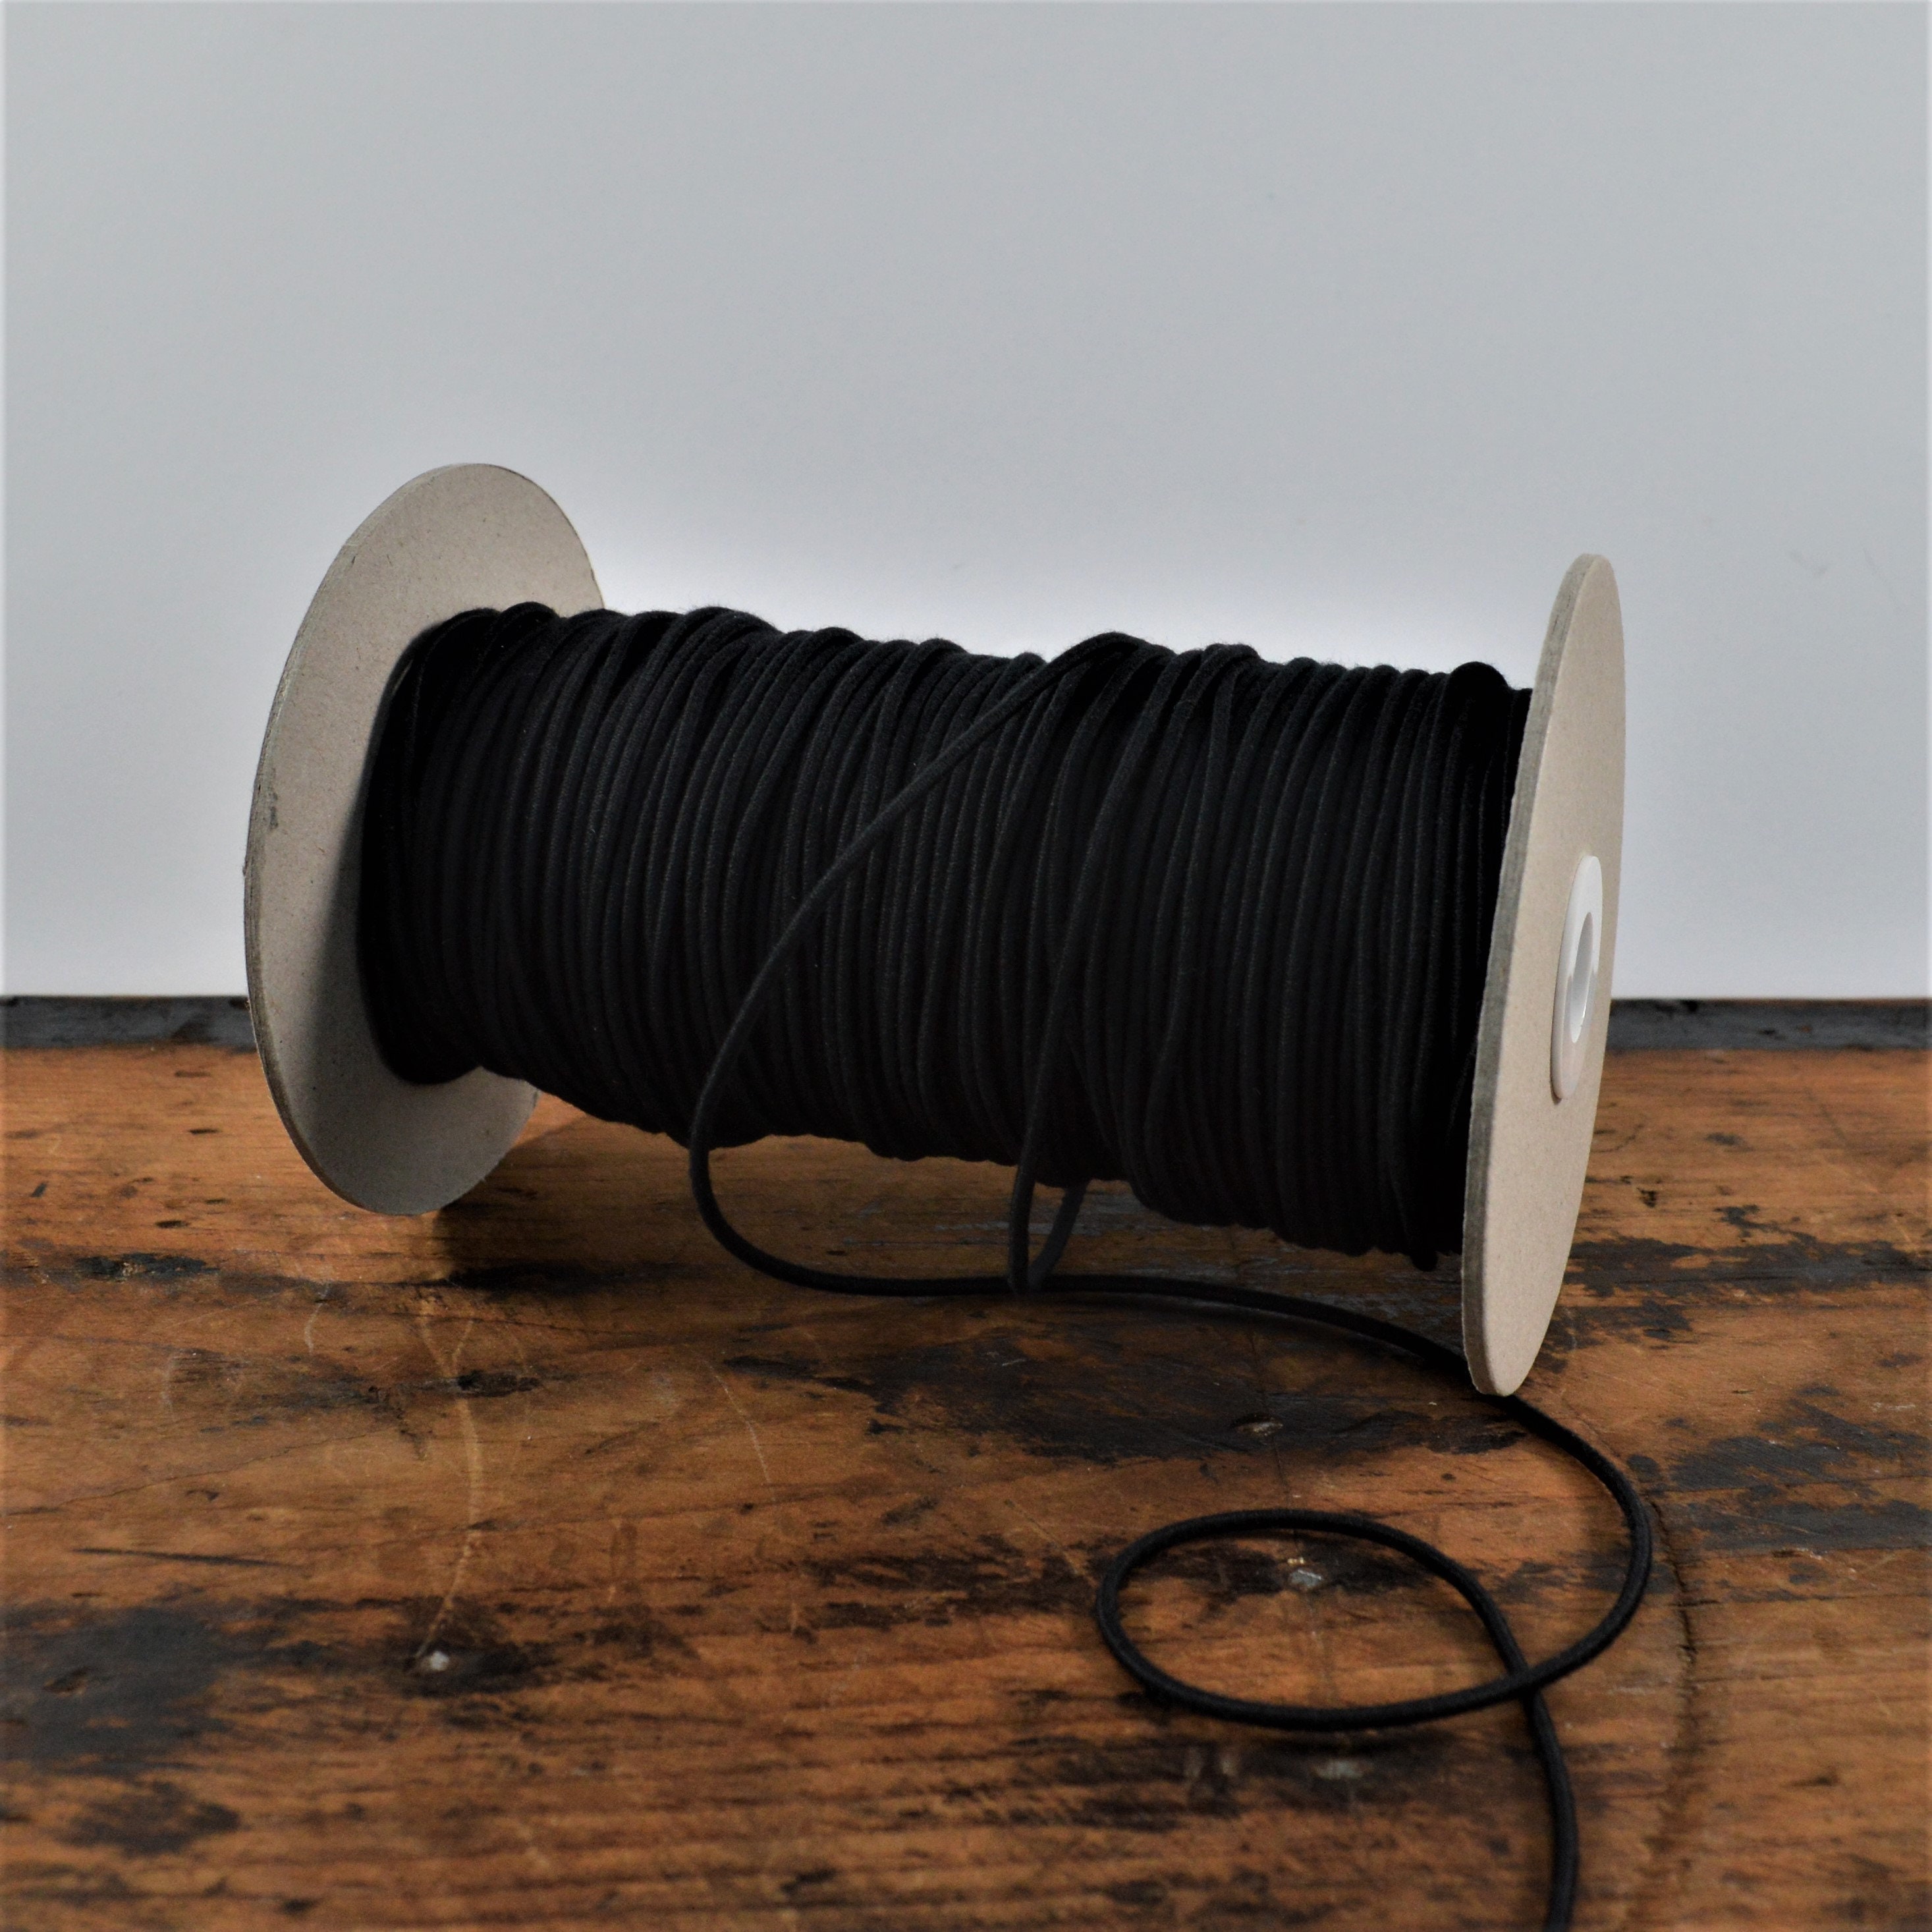 2.2 mm round cord- Sustainable Eco Organic Elastic - Maven Sewing